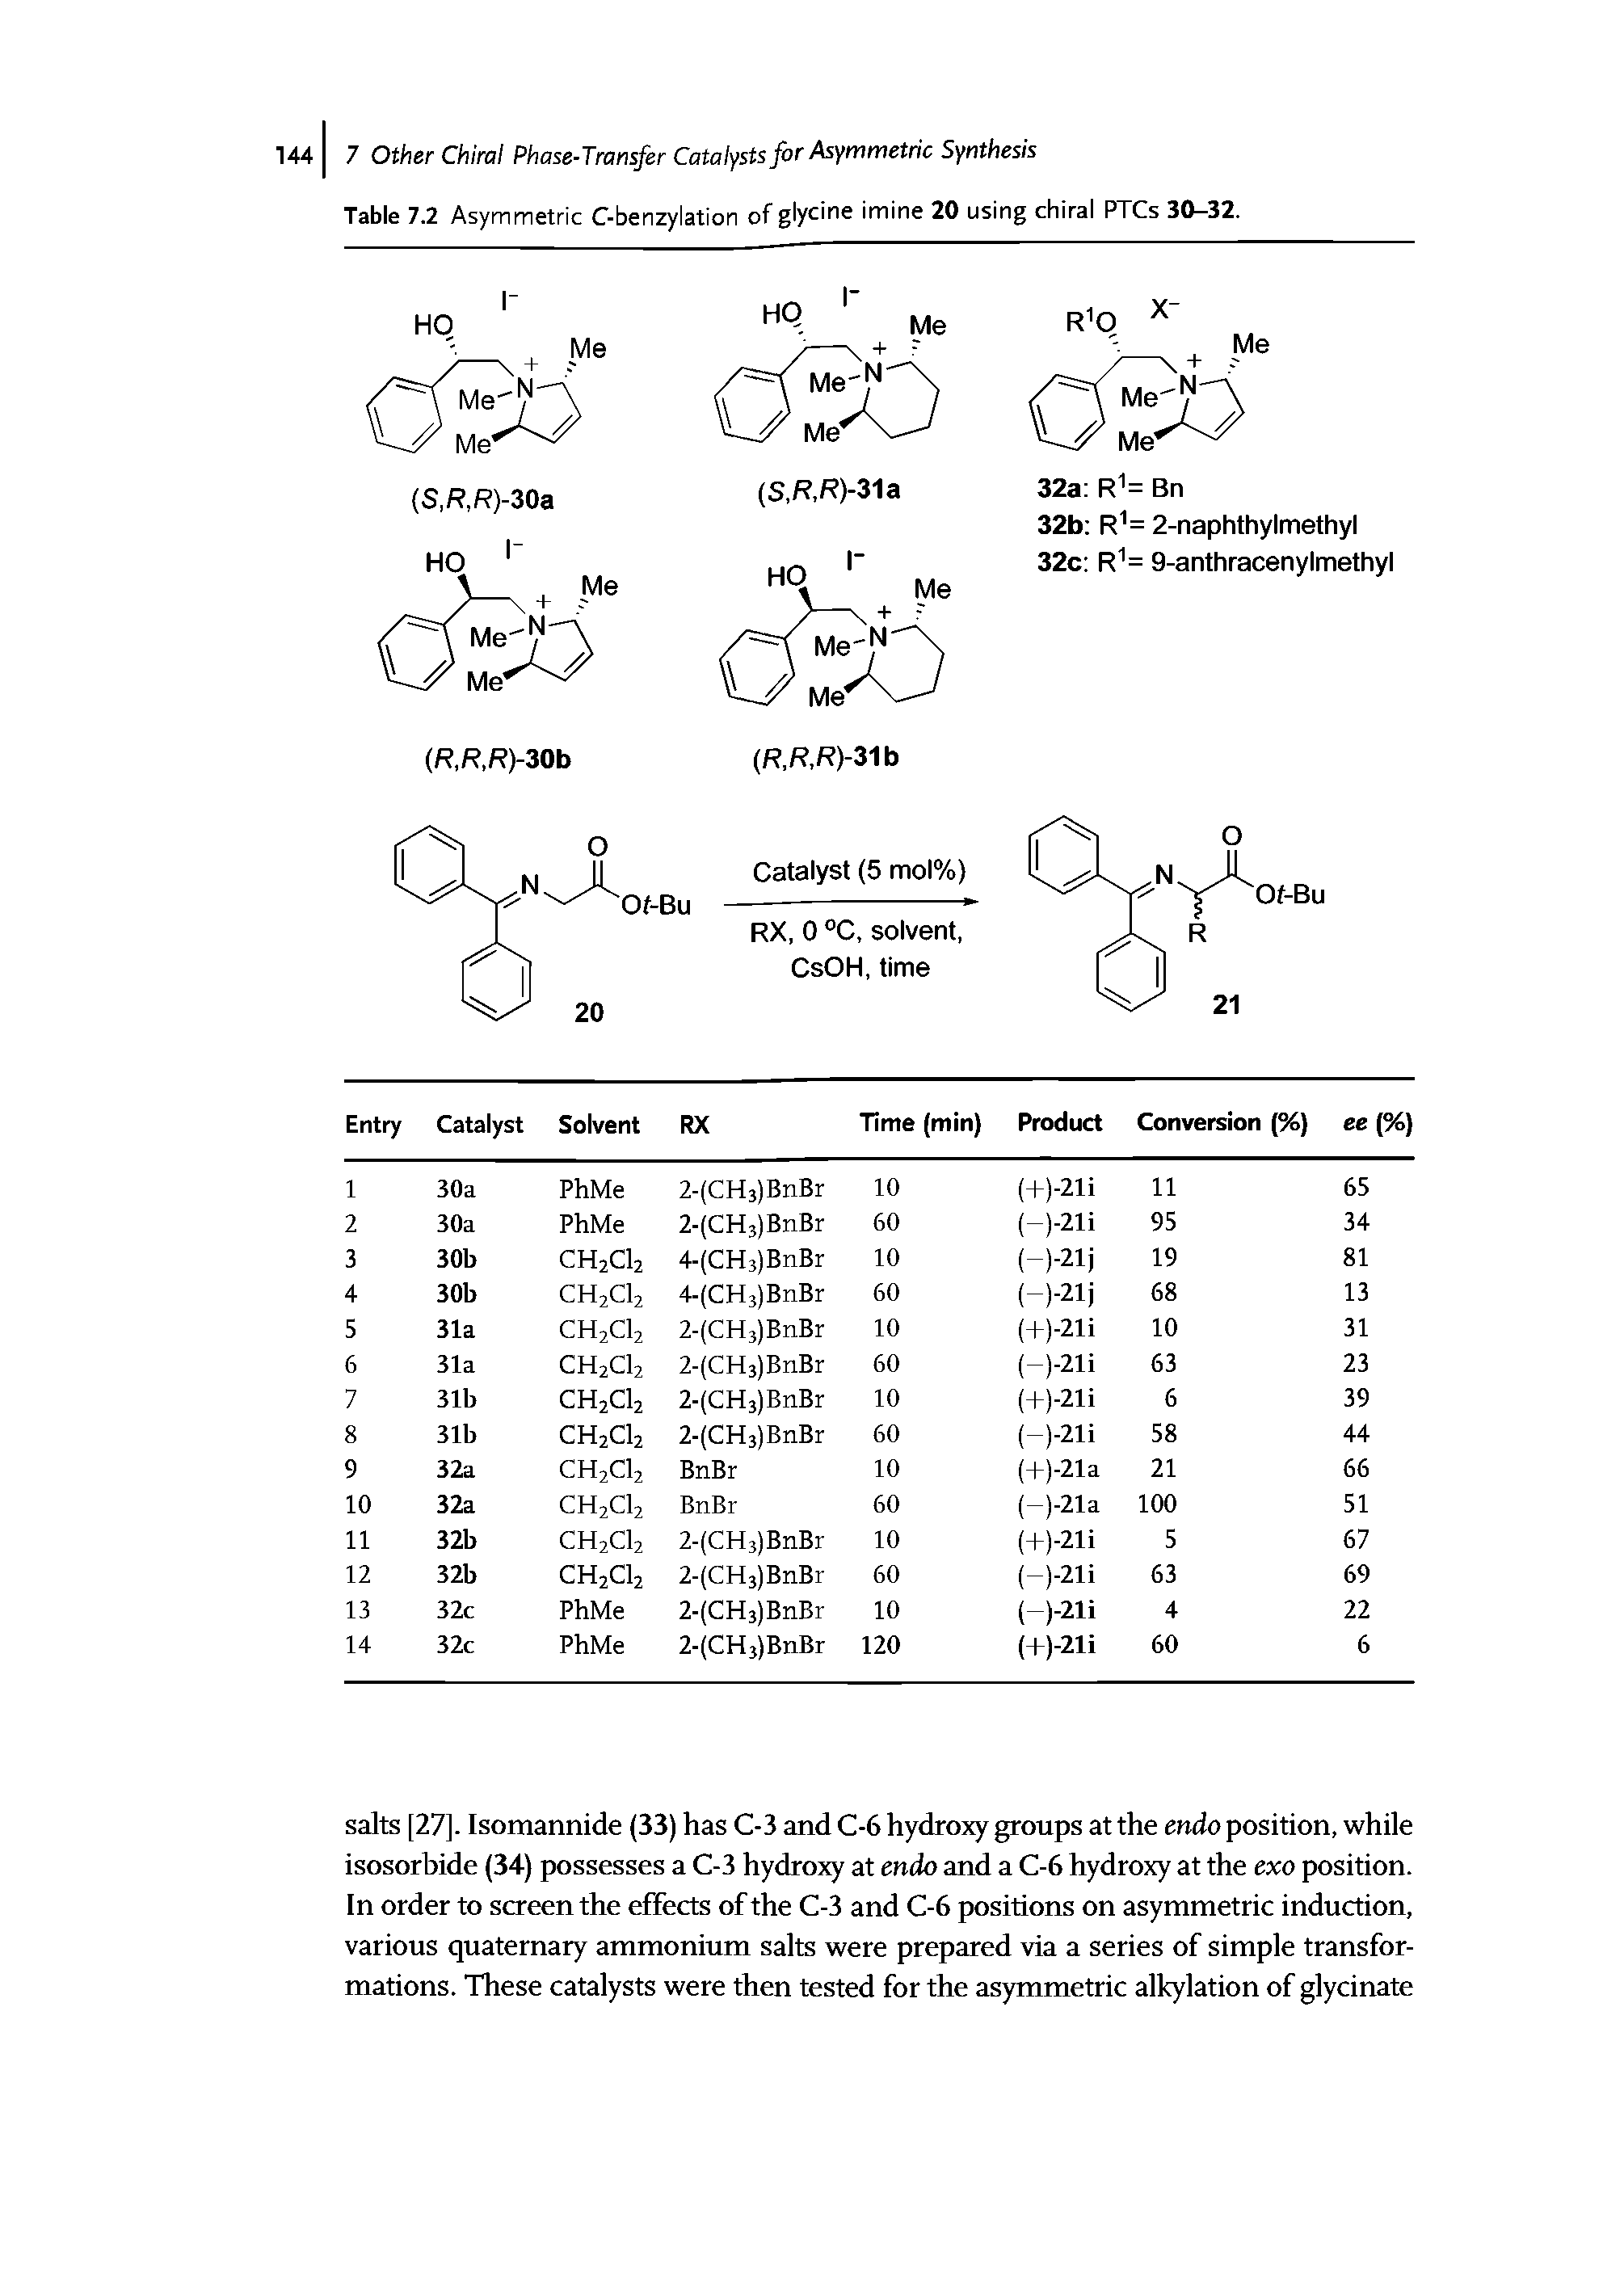 Table 7.2 Asymmetric C-benzylation of glycine imine 20 using chiral PTCs 30-32.